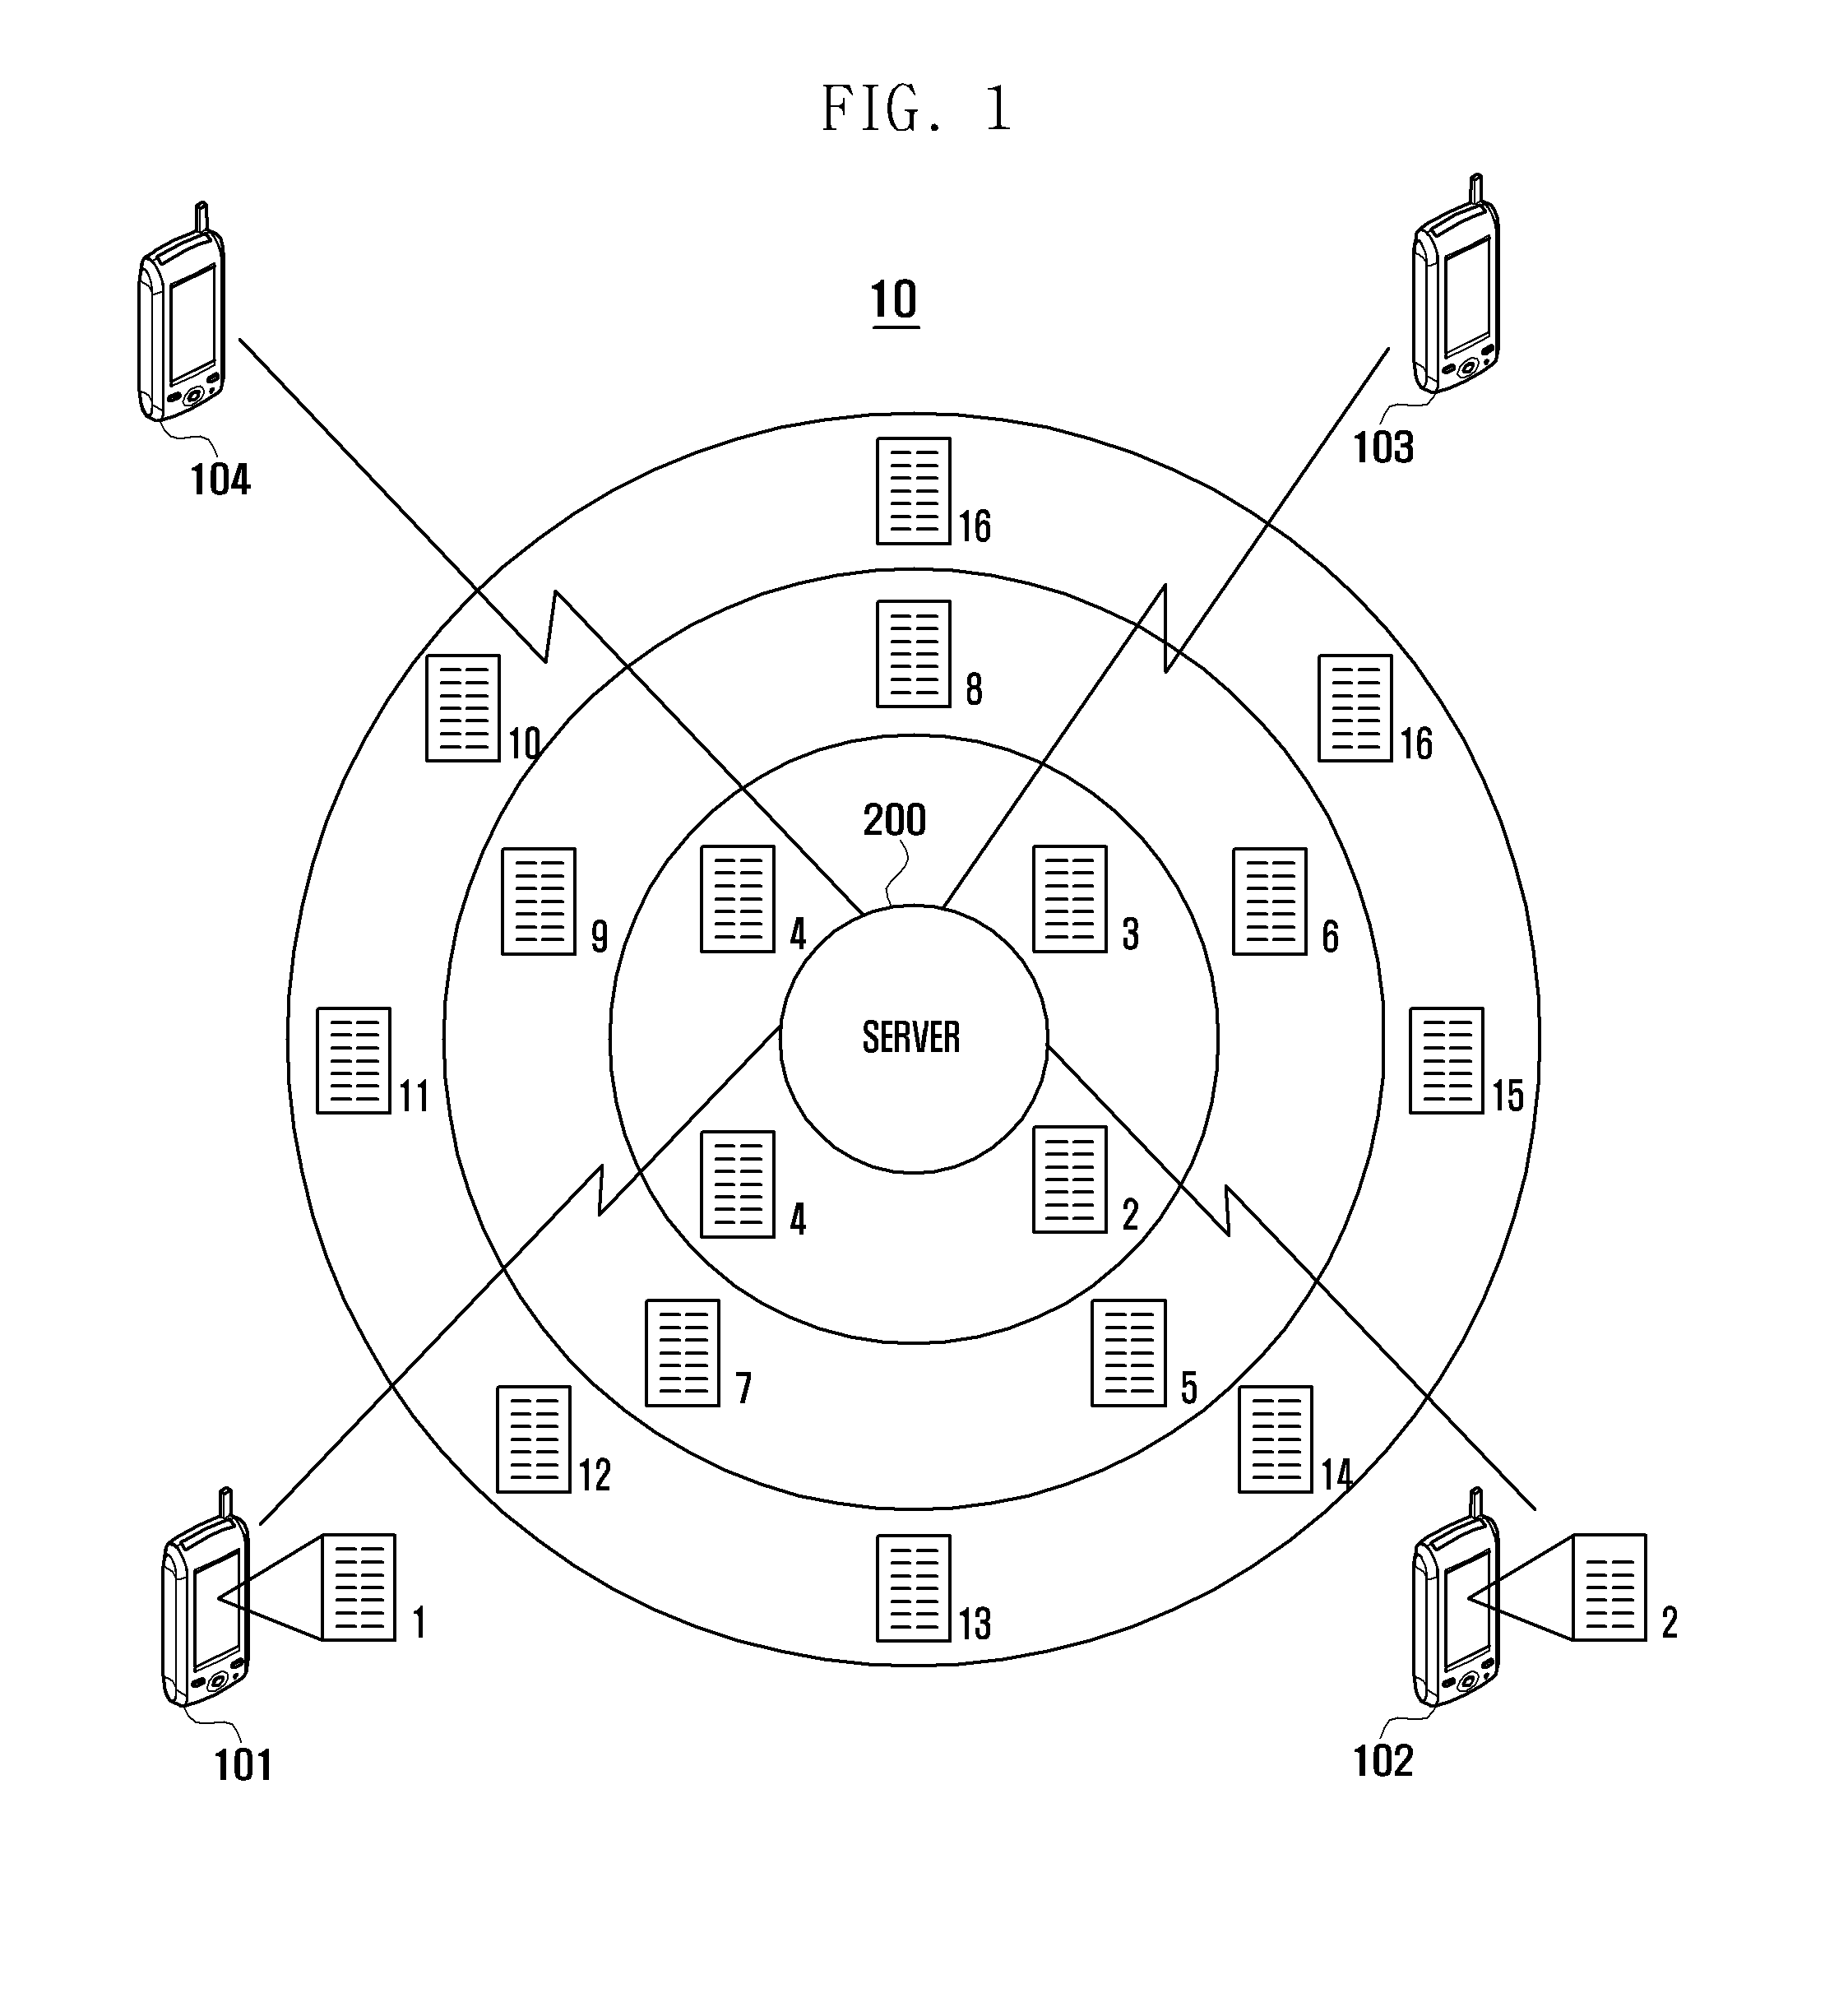 Social information management method and system adapted thereto